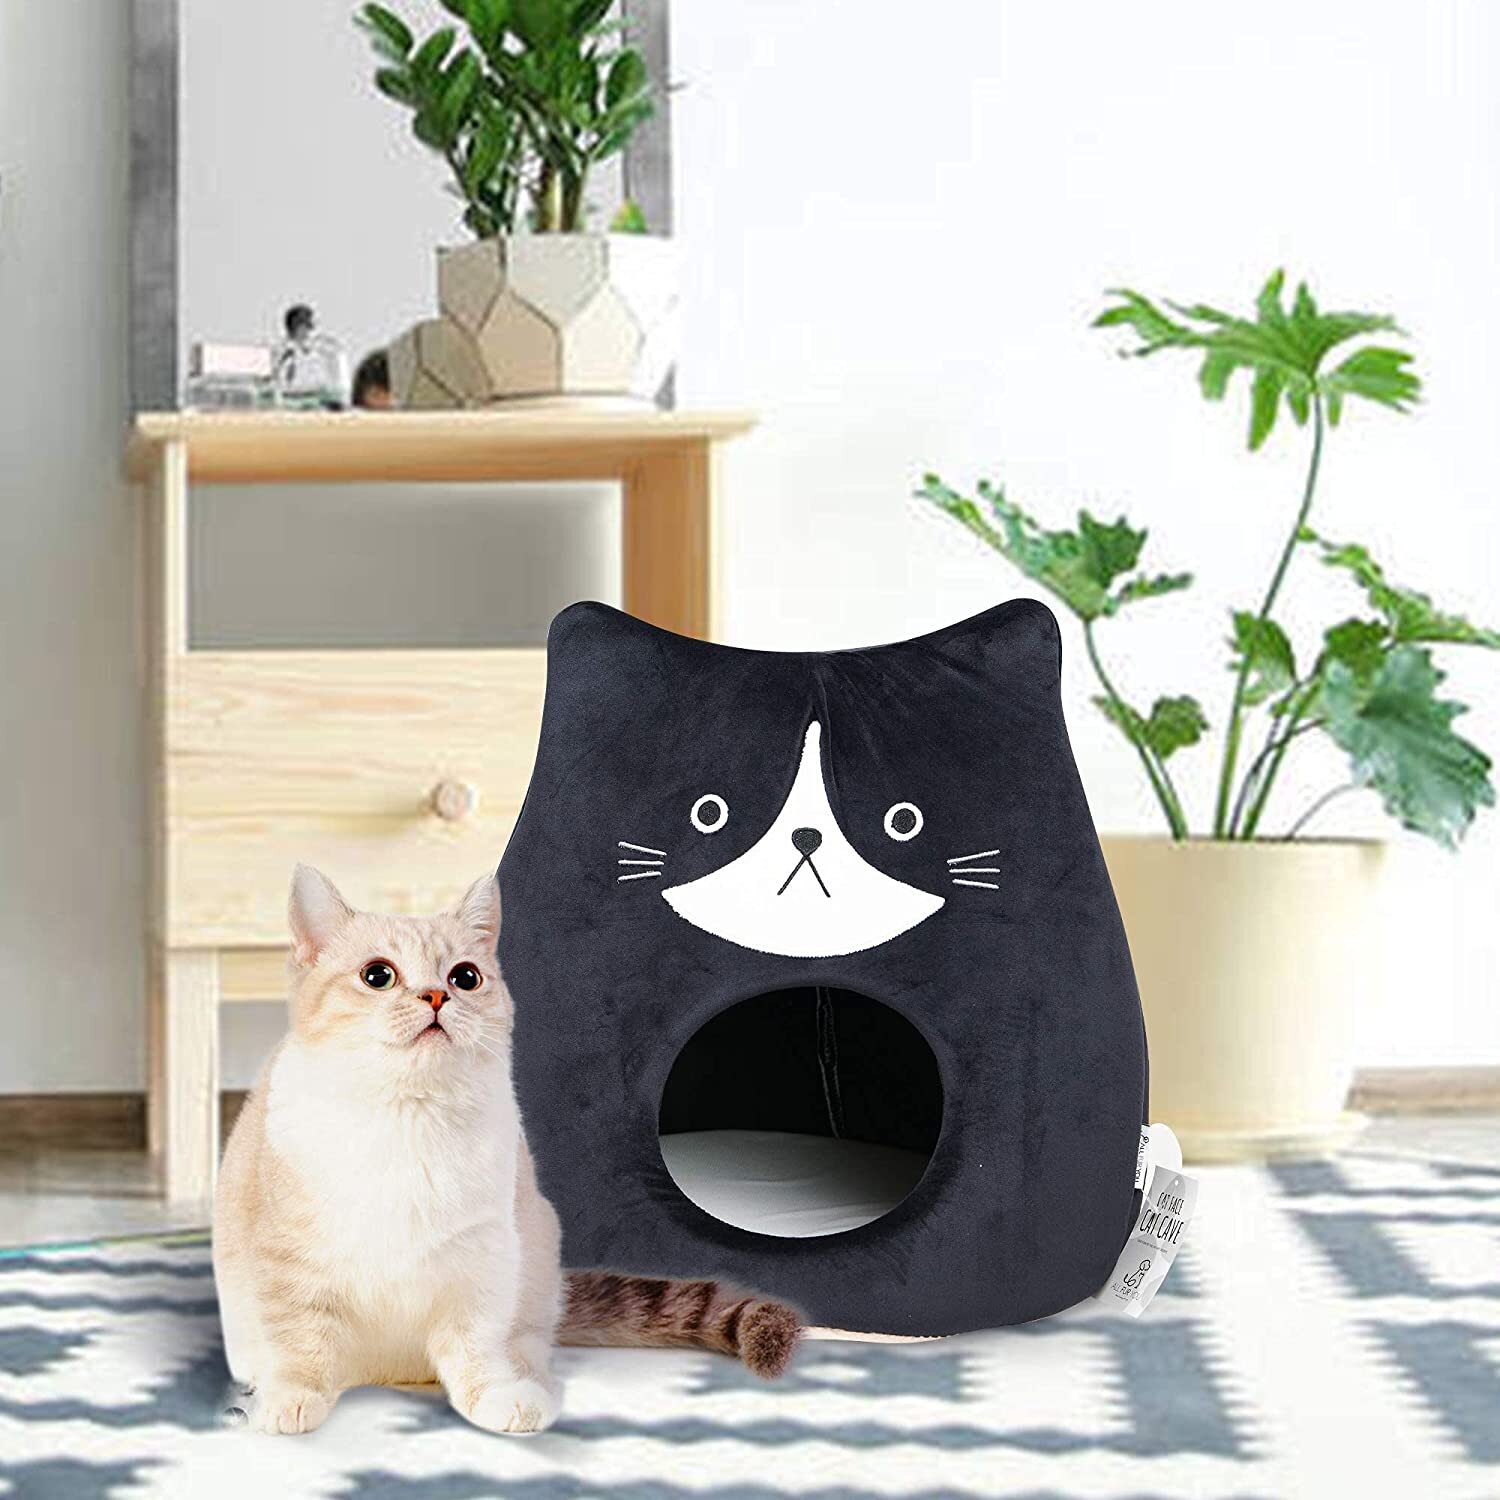 All Fur You Soft and Comfortable Cat Face Cat Cave Bed in Black image 5